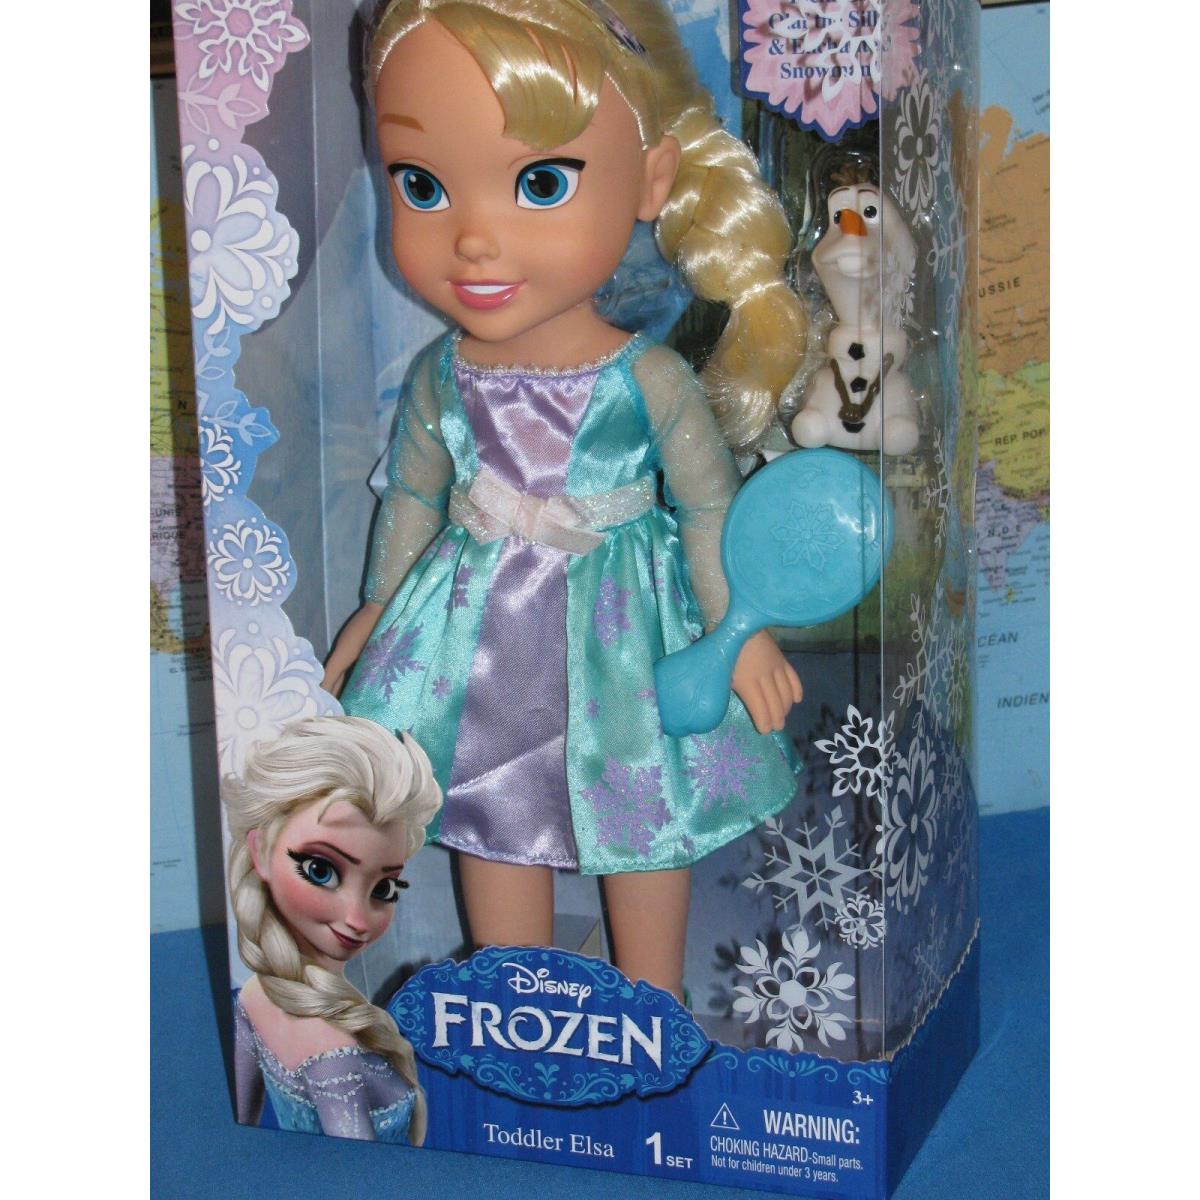 Disney Frozen Princess Toddler Elsa Doll Set Includes Olaf The Silly Snowman